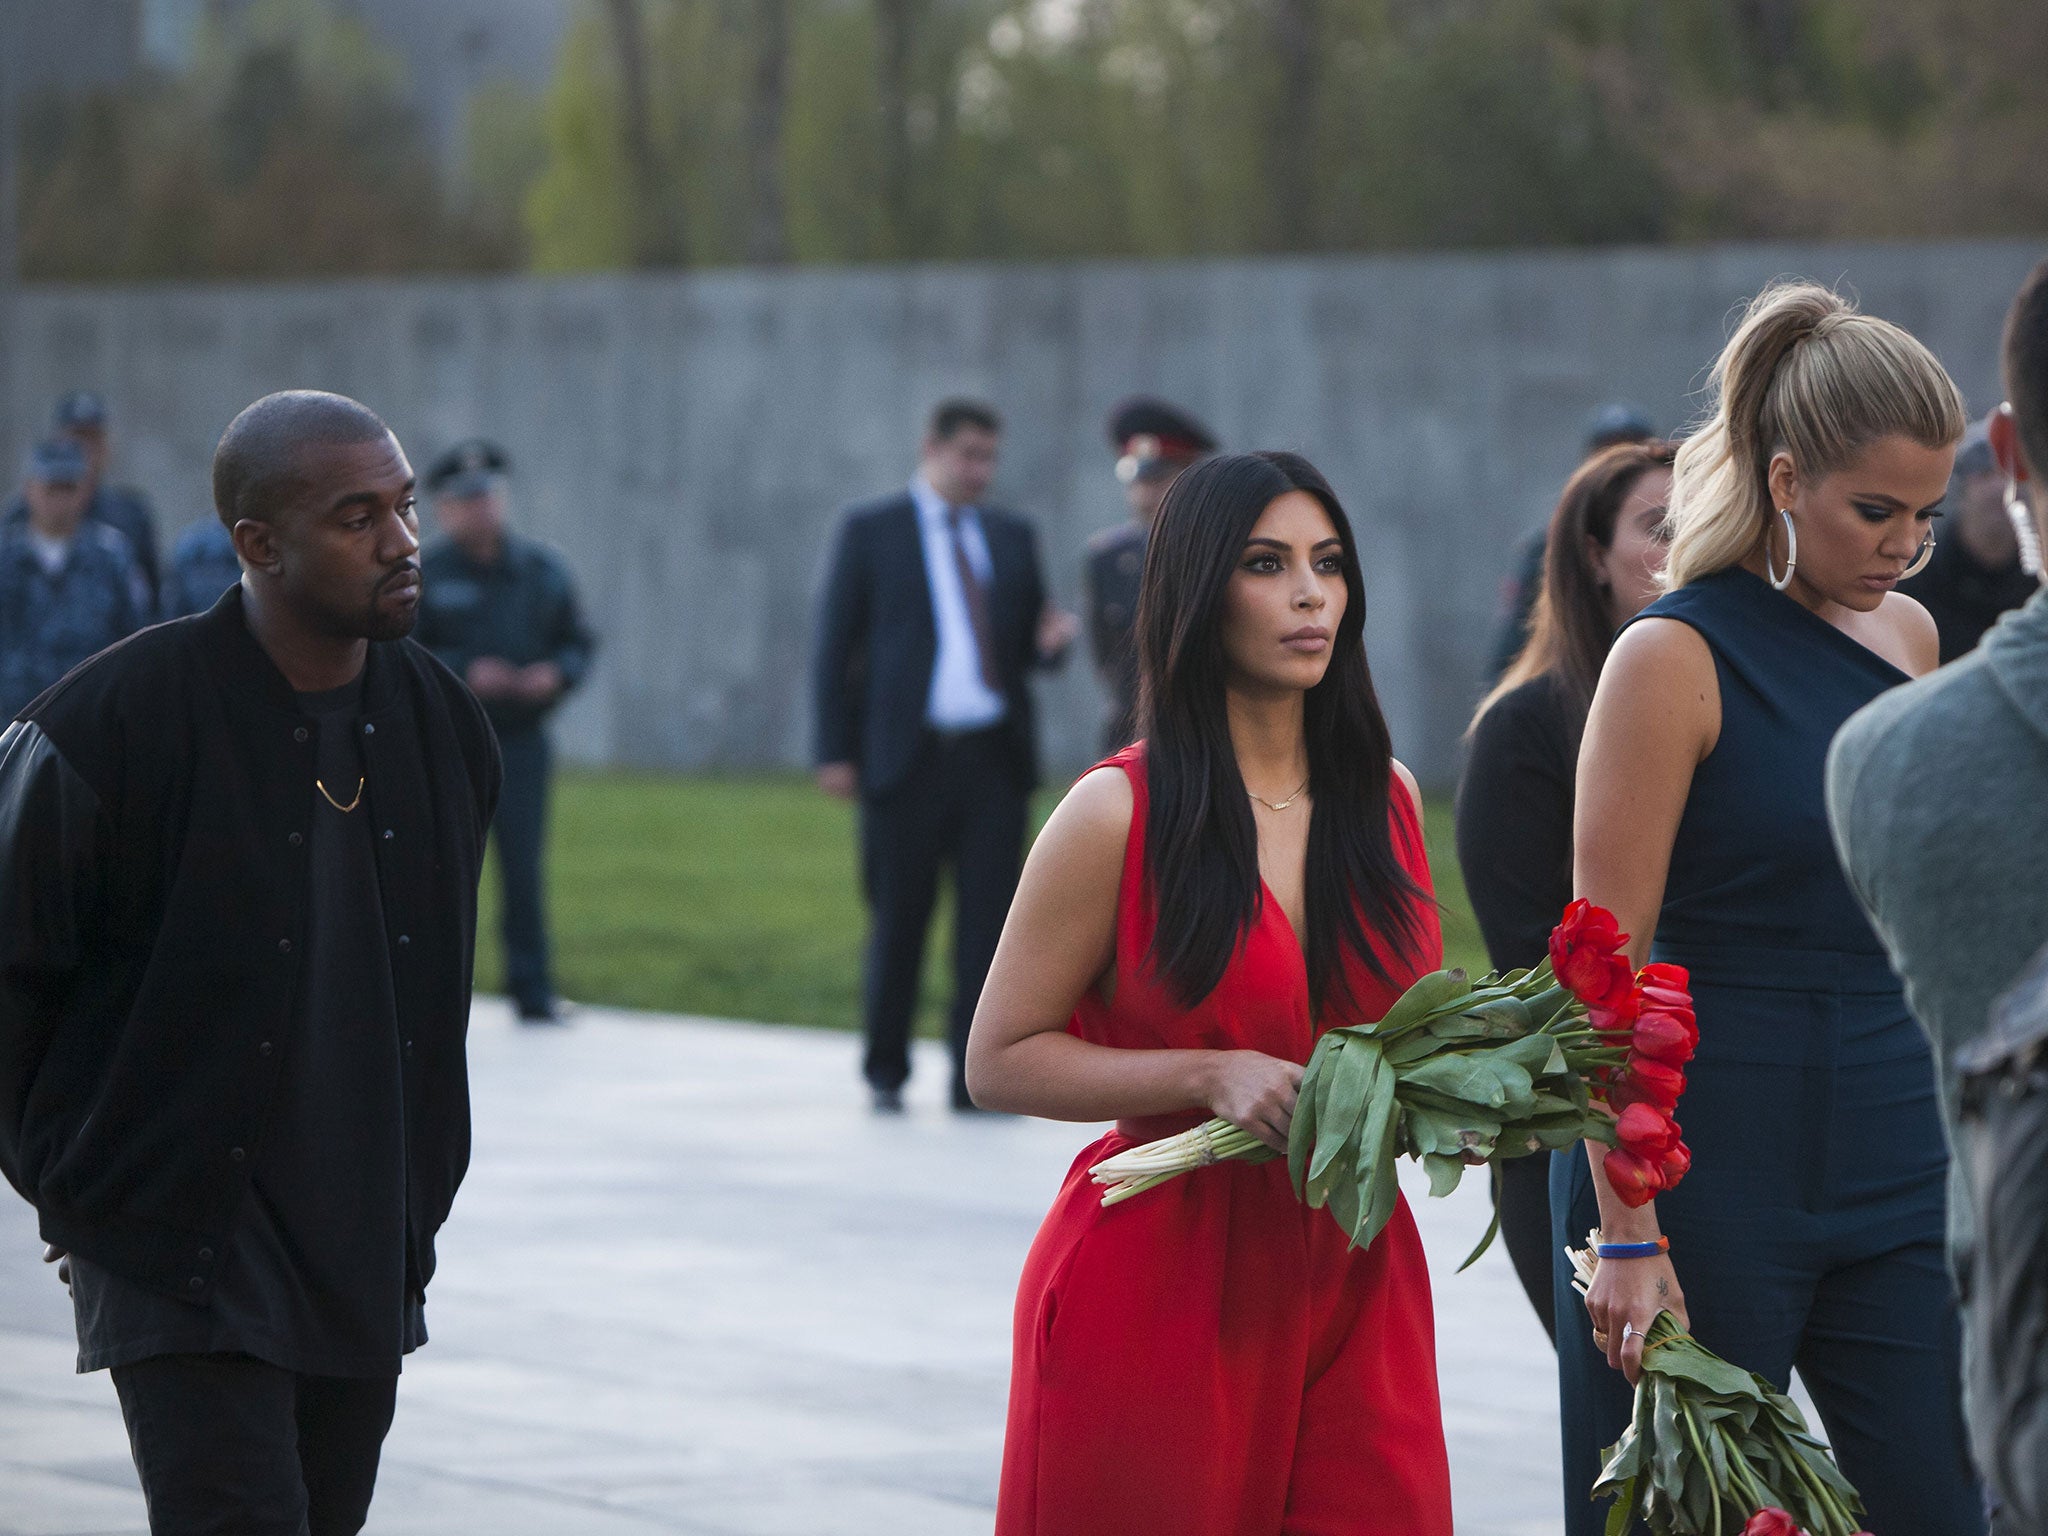 Kim Kardashian (L) and her sister Khloe (3rdL) visit the genocide memorial, which commemorates the 1915 mass killing of Armenians in the Ottoman Empire